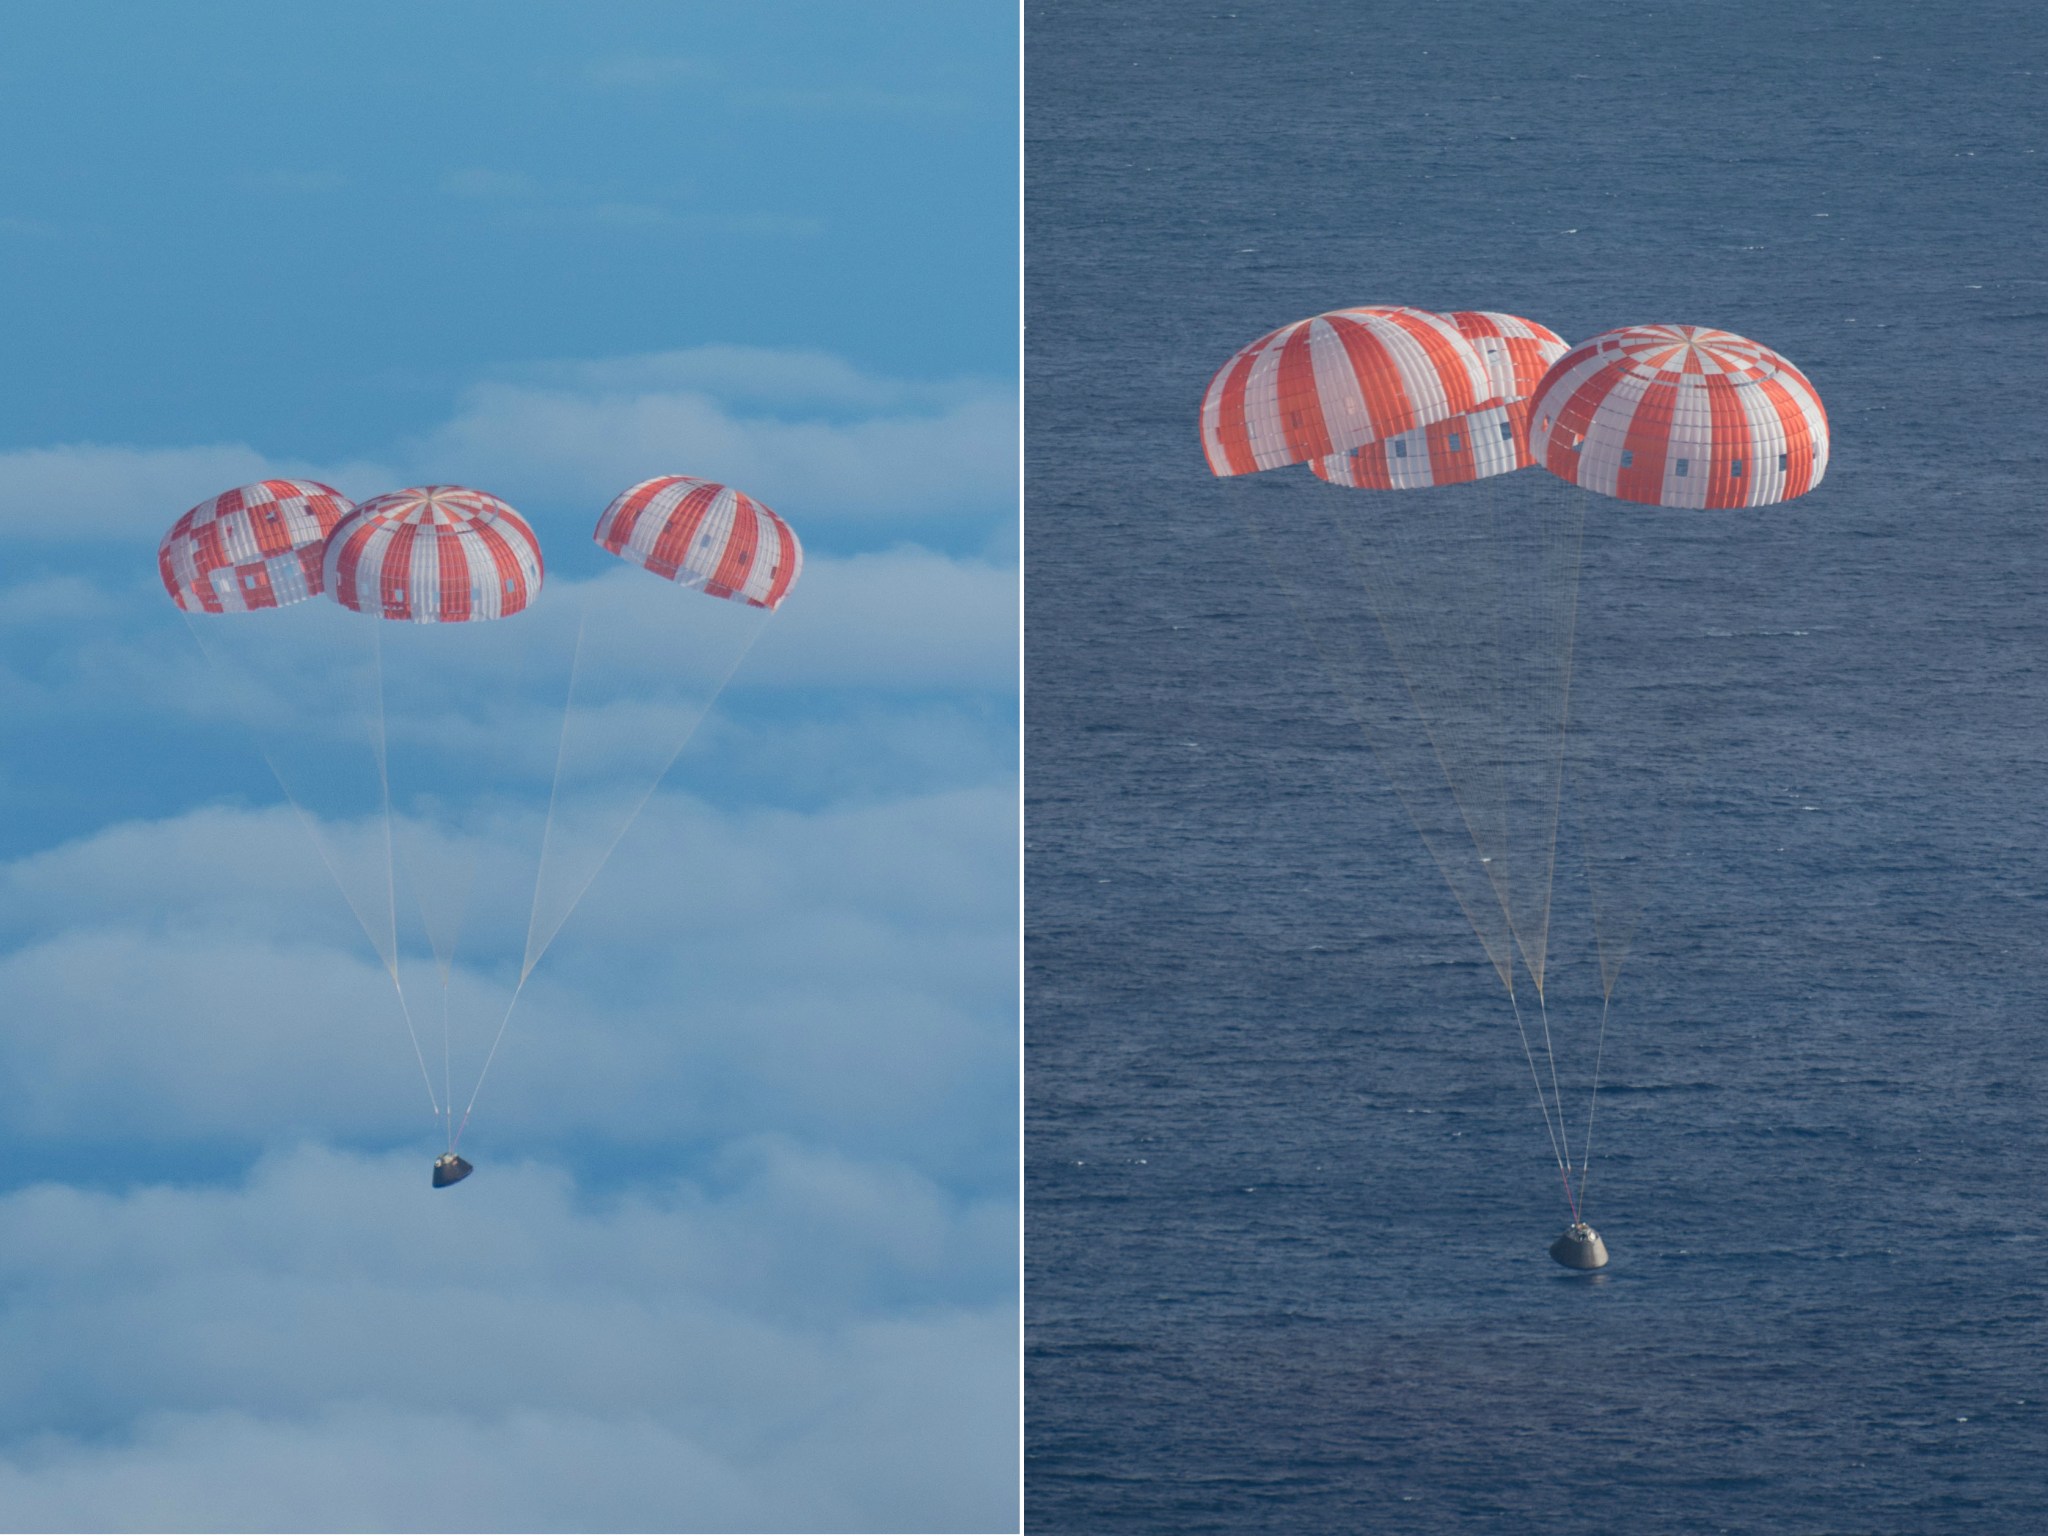 NASA's Orion spacecraft descends back to Earth after its December 2014 flight test